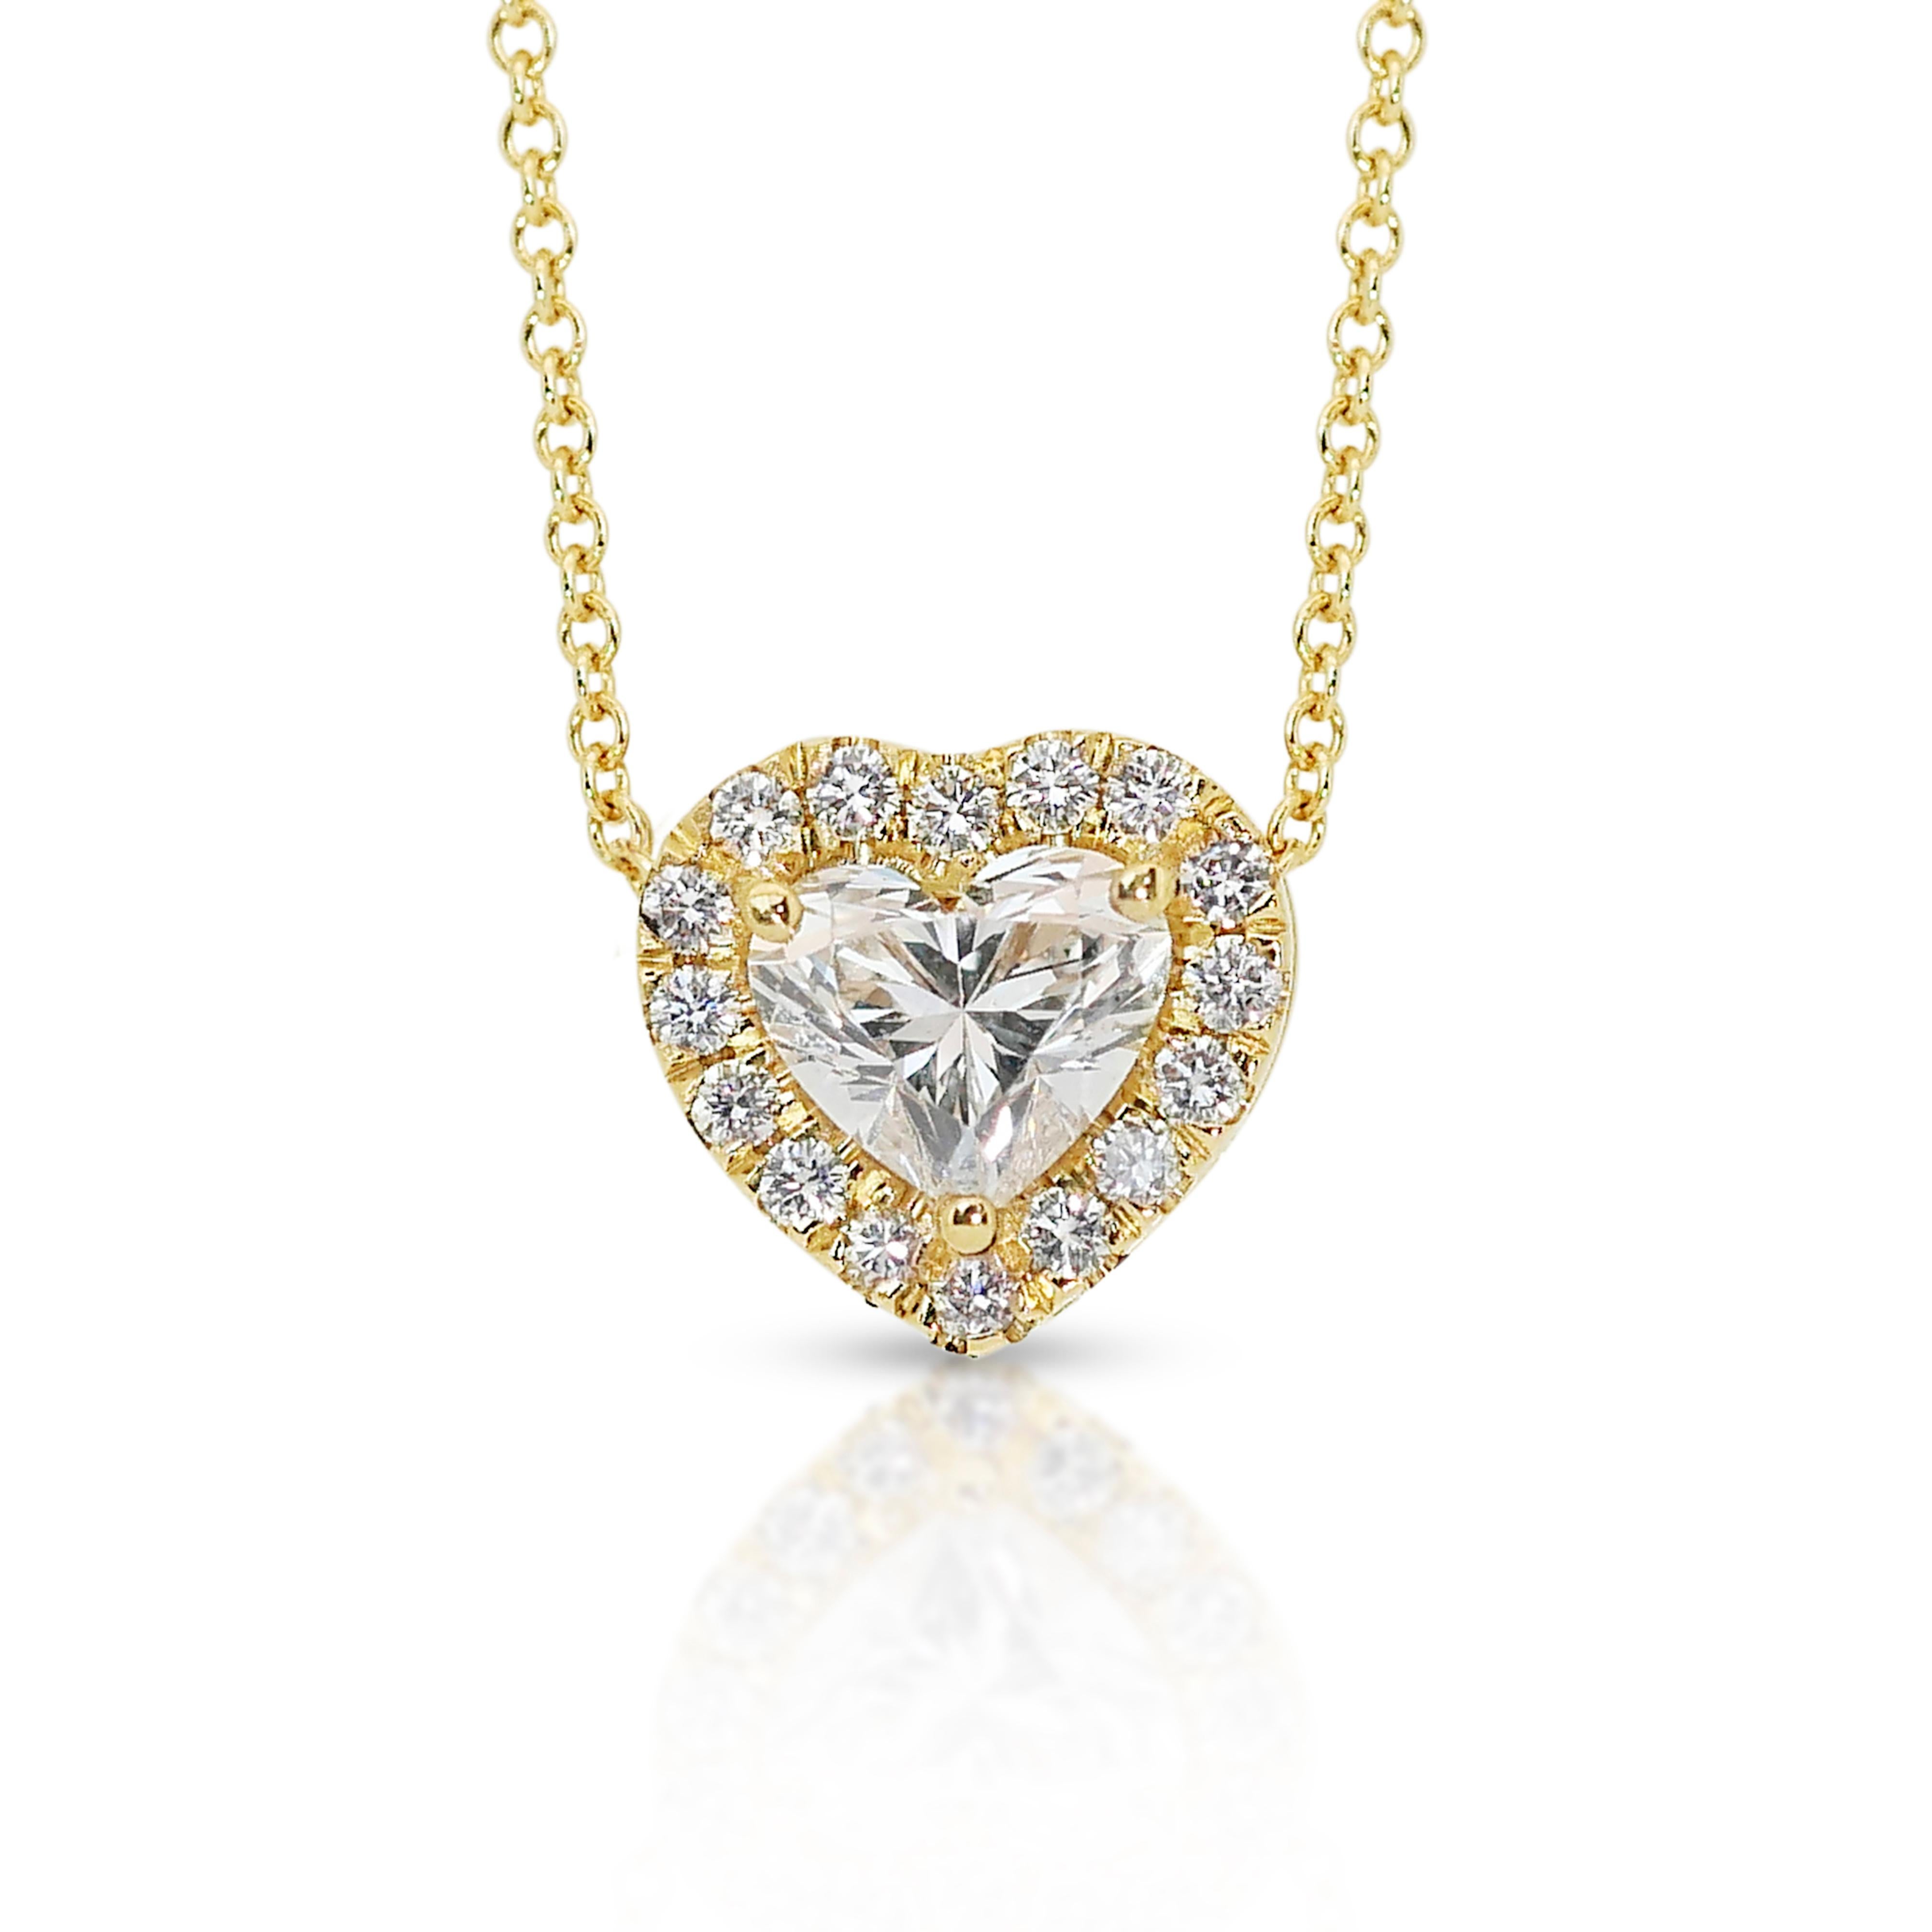 Brilliant 1.28ct Diamonds Halo Necklace in 18k Yellow Gold - IGI Certified For Sale 3